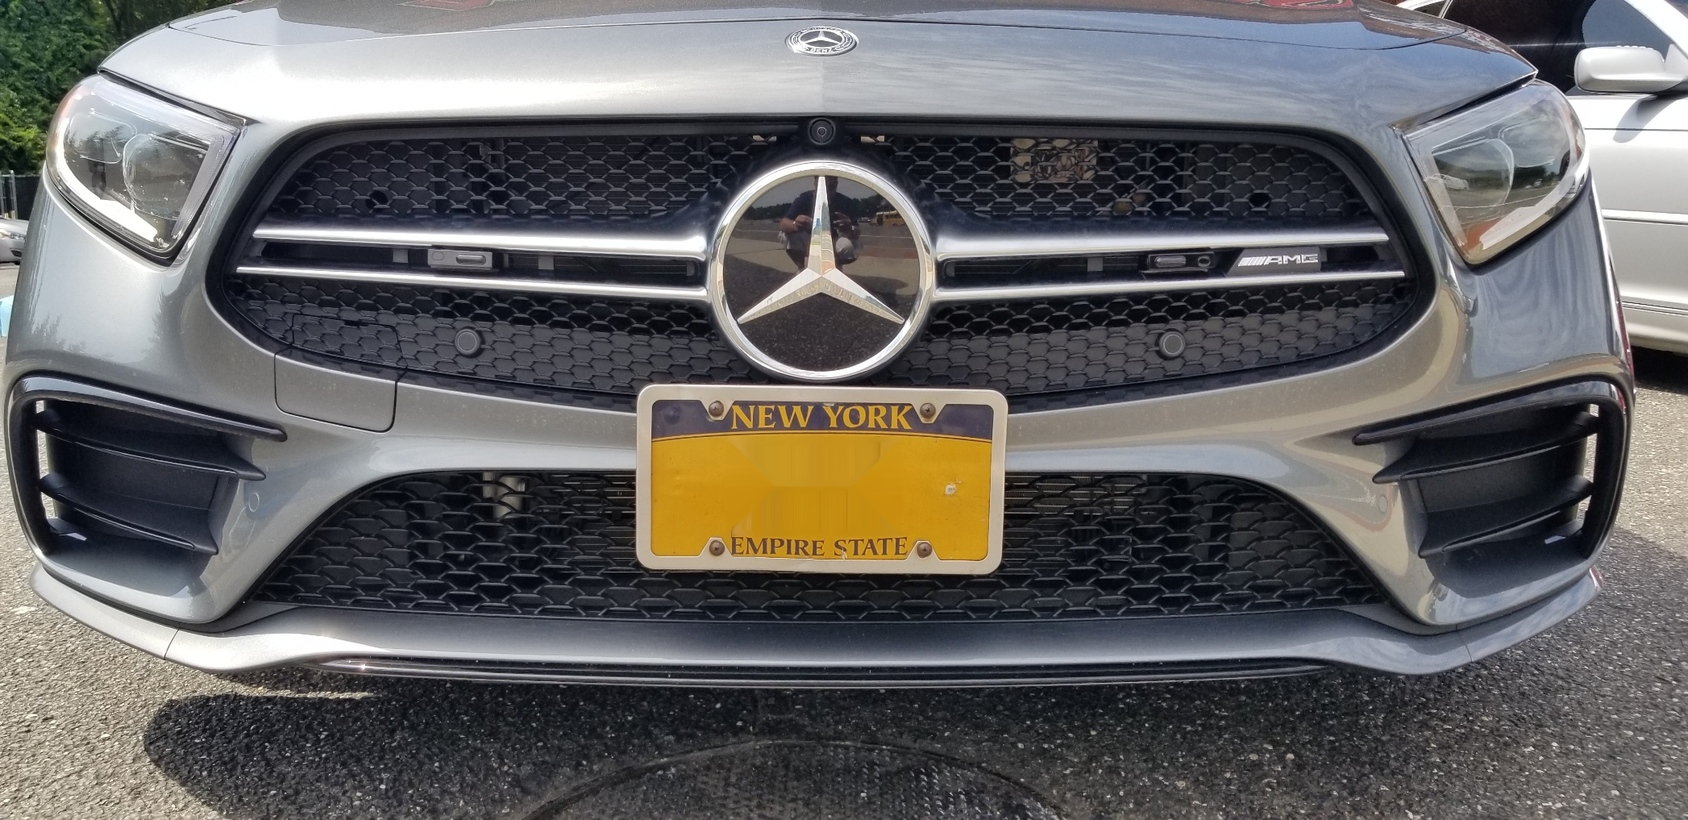 Front K40 police laser jammers on a 2019 Mercedes Benz CLS53 AMG in Sayville, NY a